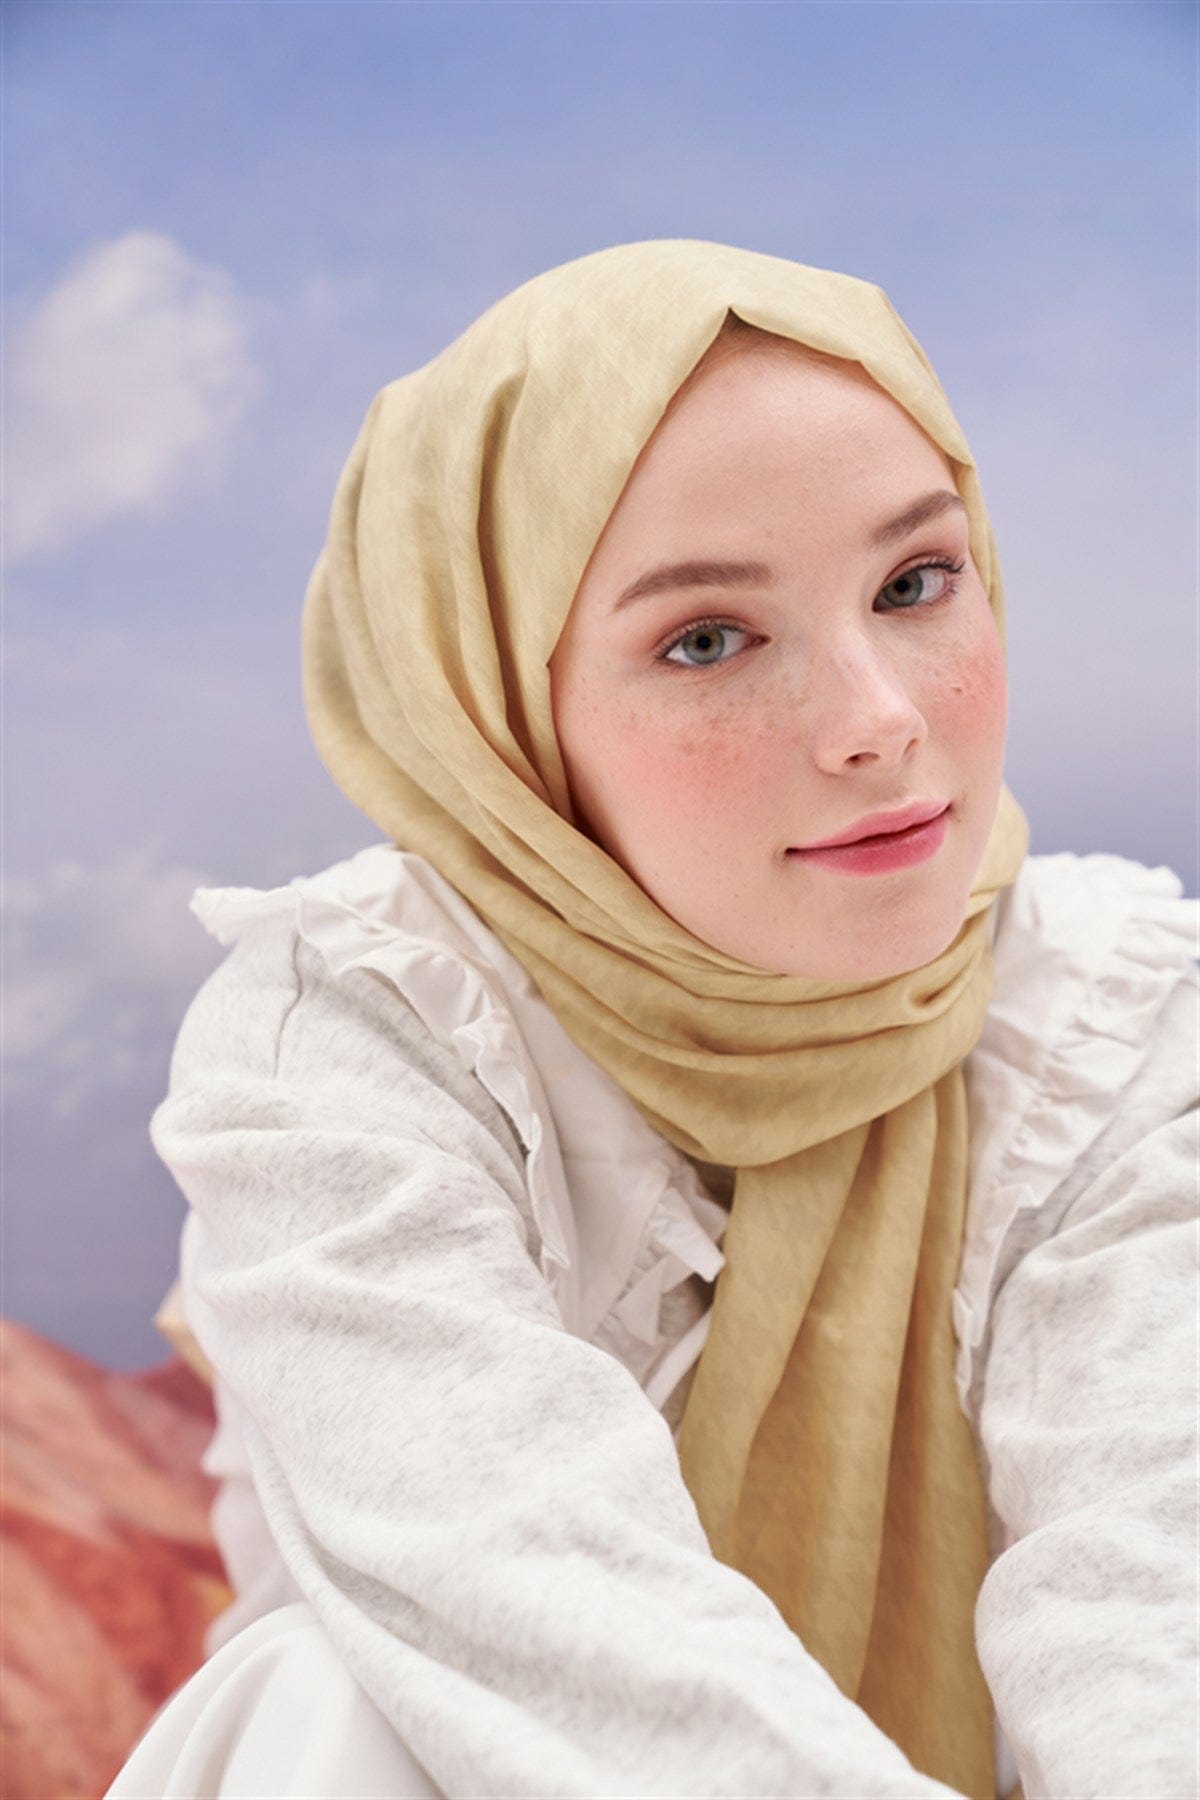 Easy + Fast : HOW TO Organize your Hijabs/Scarfs